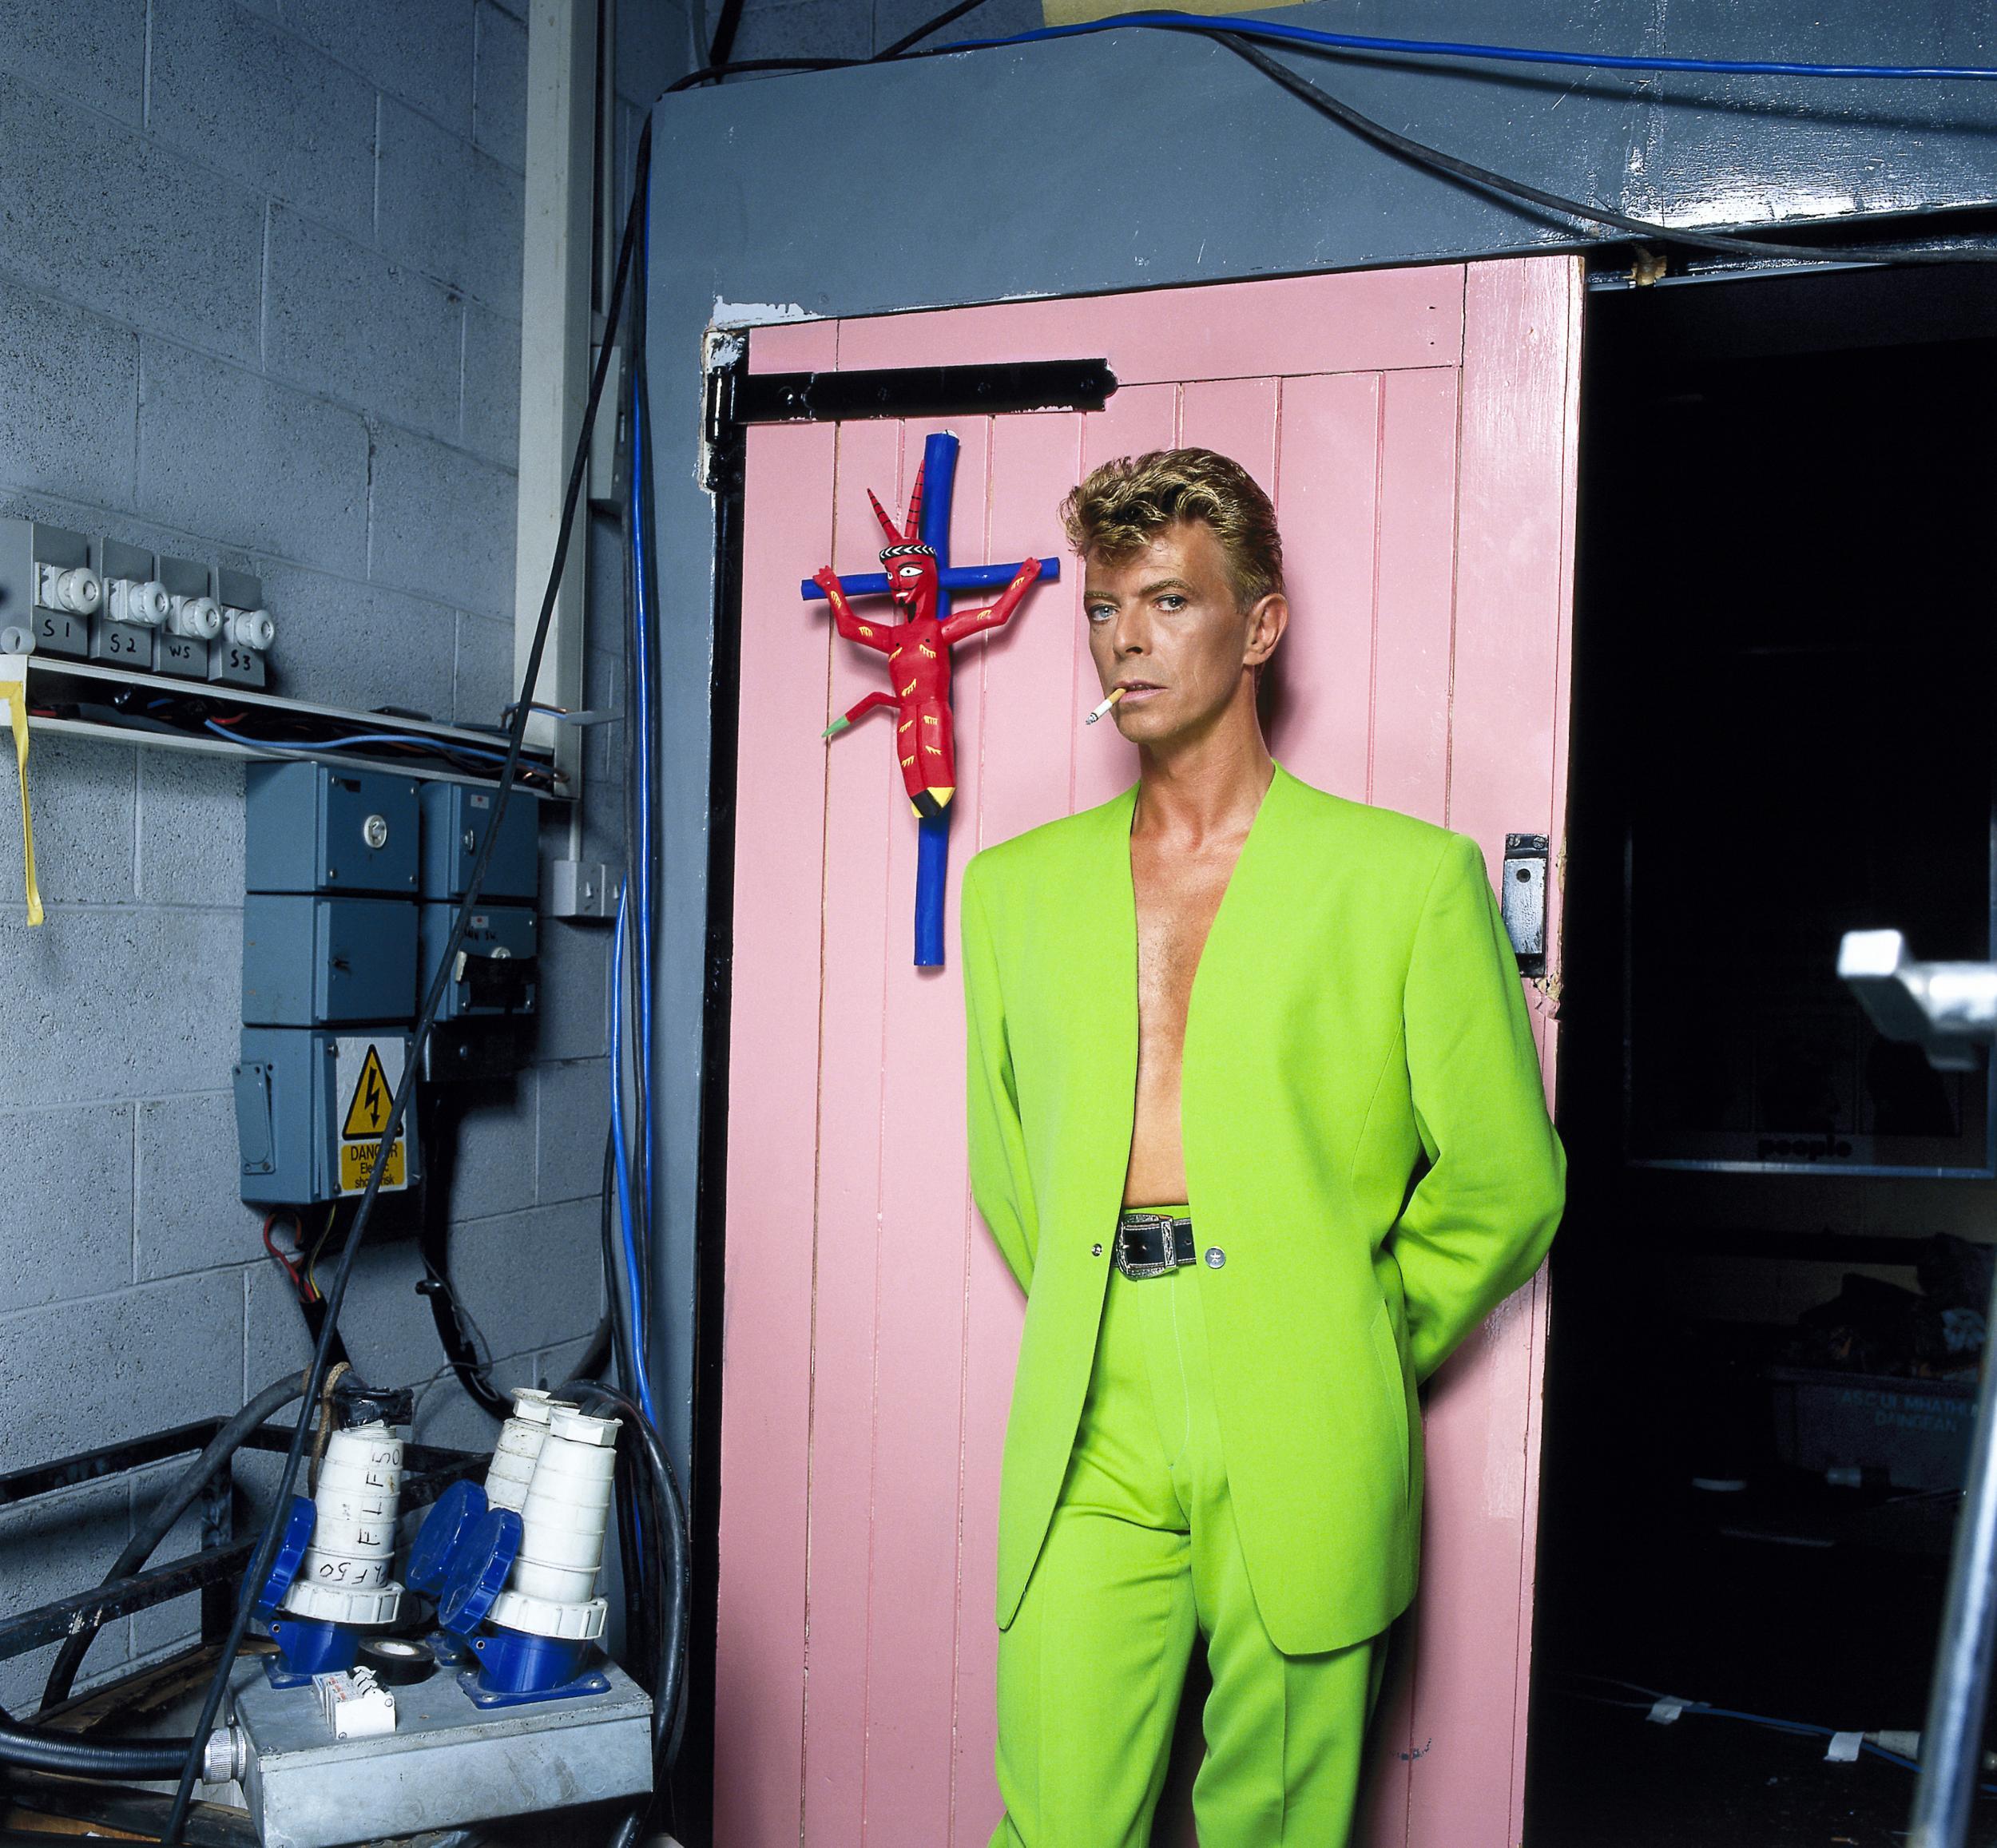 Bowie in a Thierry Mugler suit, 1991. ‘With Bowie, I got to see the wonderfully modest and generous man behind the public image’